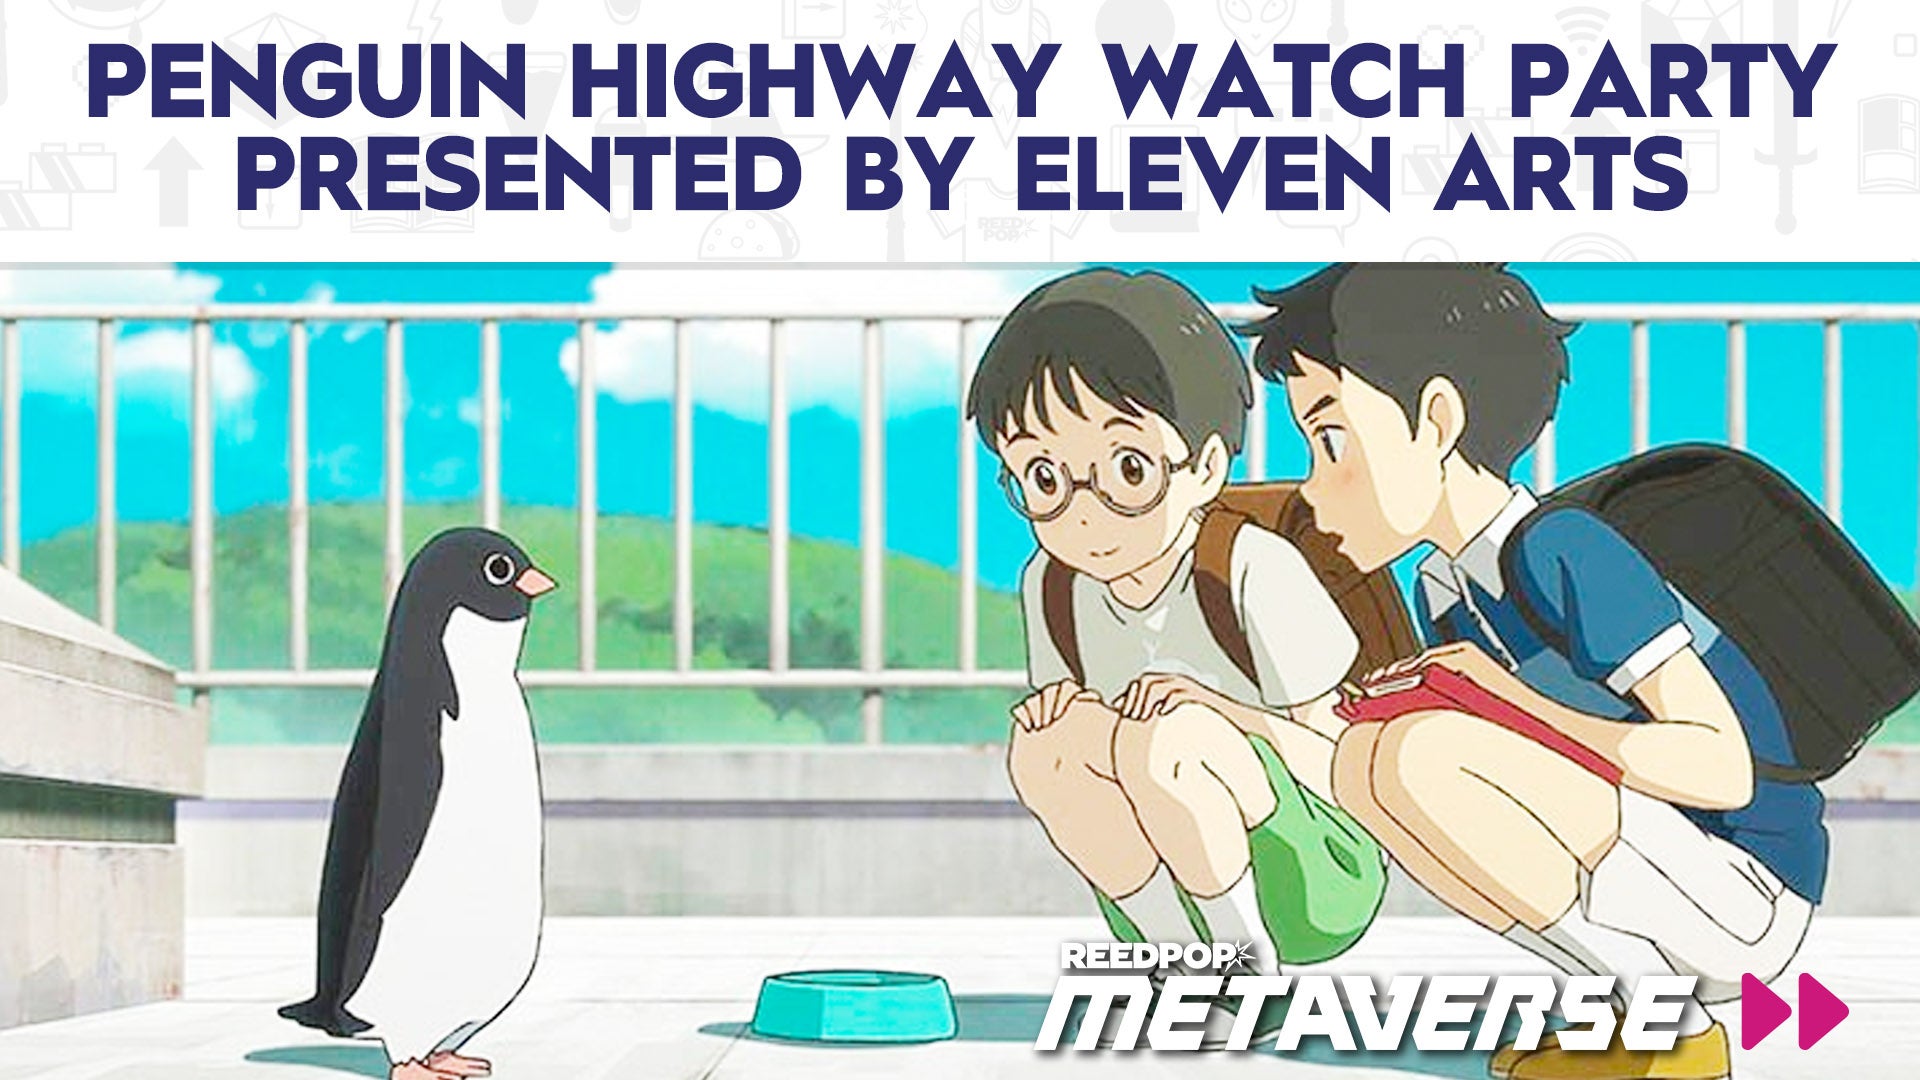 Image for Penguin Highway Watch Party, presented by Eleven Arts